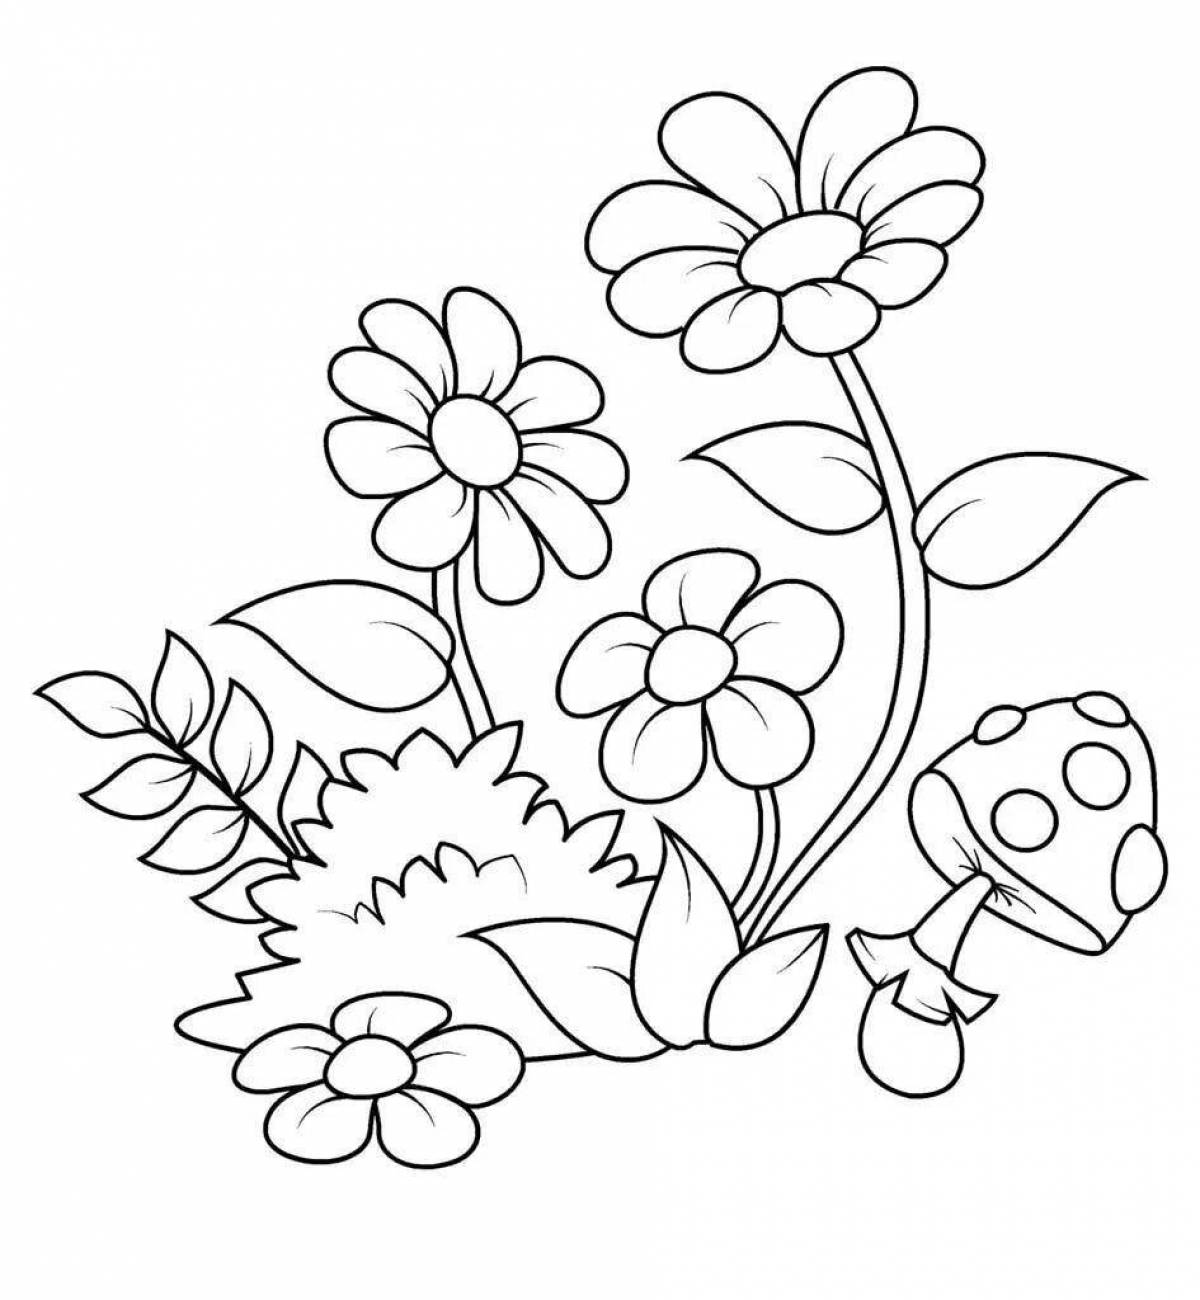 Magic Cleanup Coloring Page